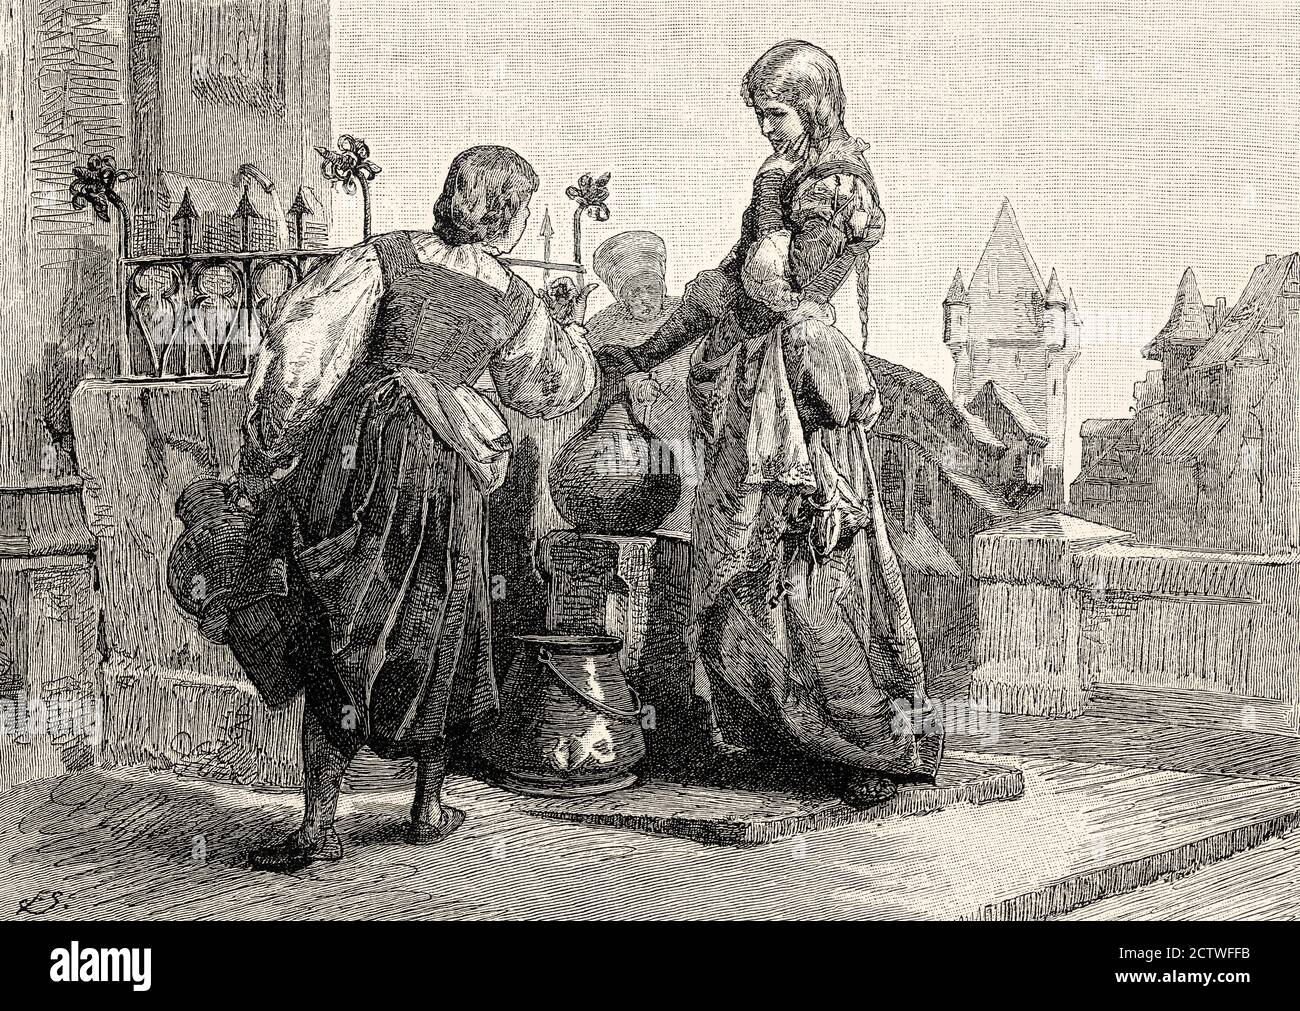 Margaret and Bessy at the Well, first part of the tragic play Faust by Johann Wolfgang von Goethe Stock Photo